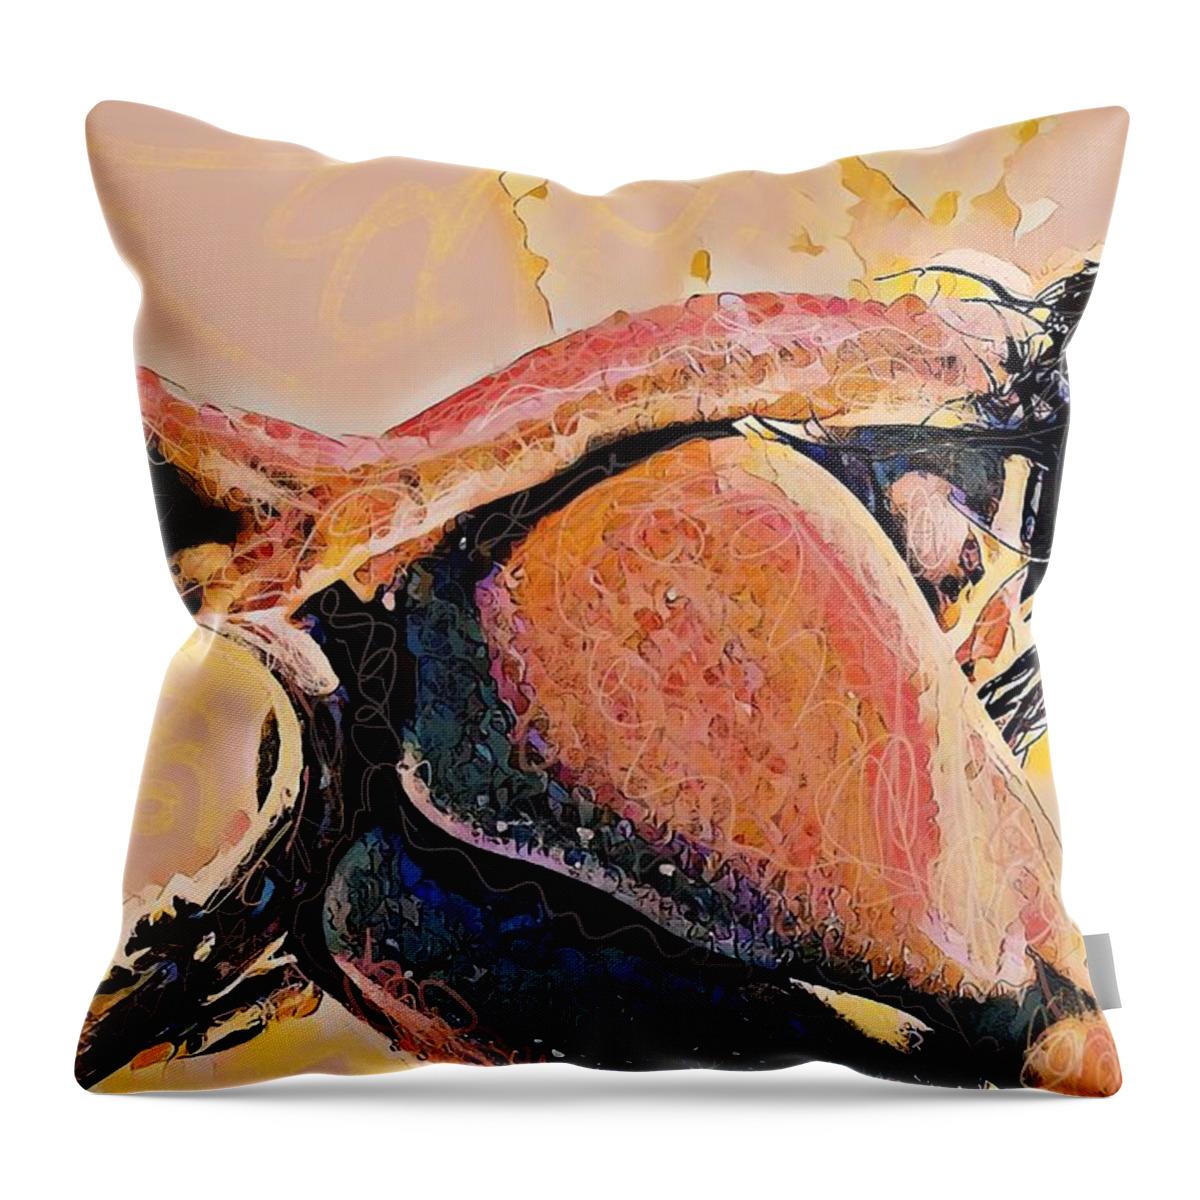 Cali The Destroyer Throw Pillow featuring the digital art Kali the Destroyer by Sol Luckman